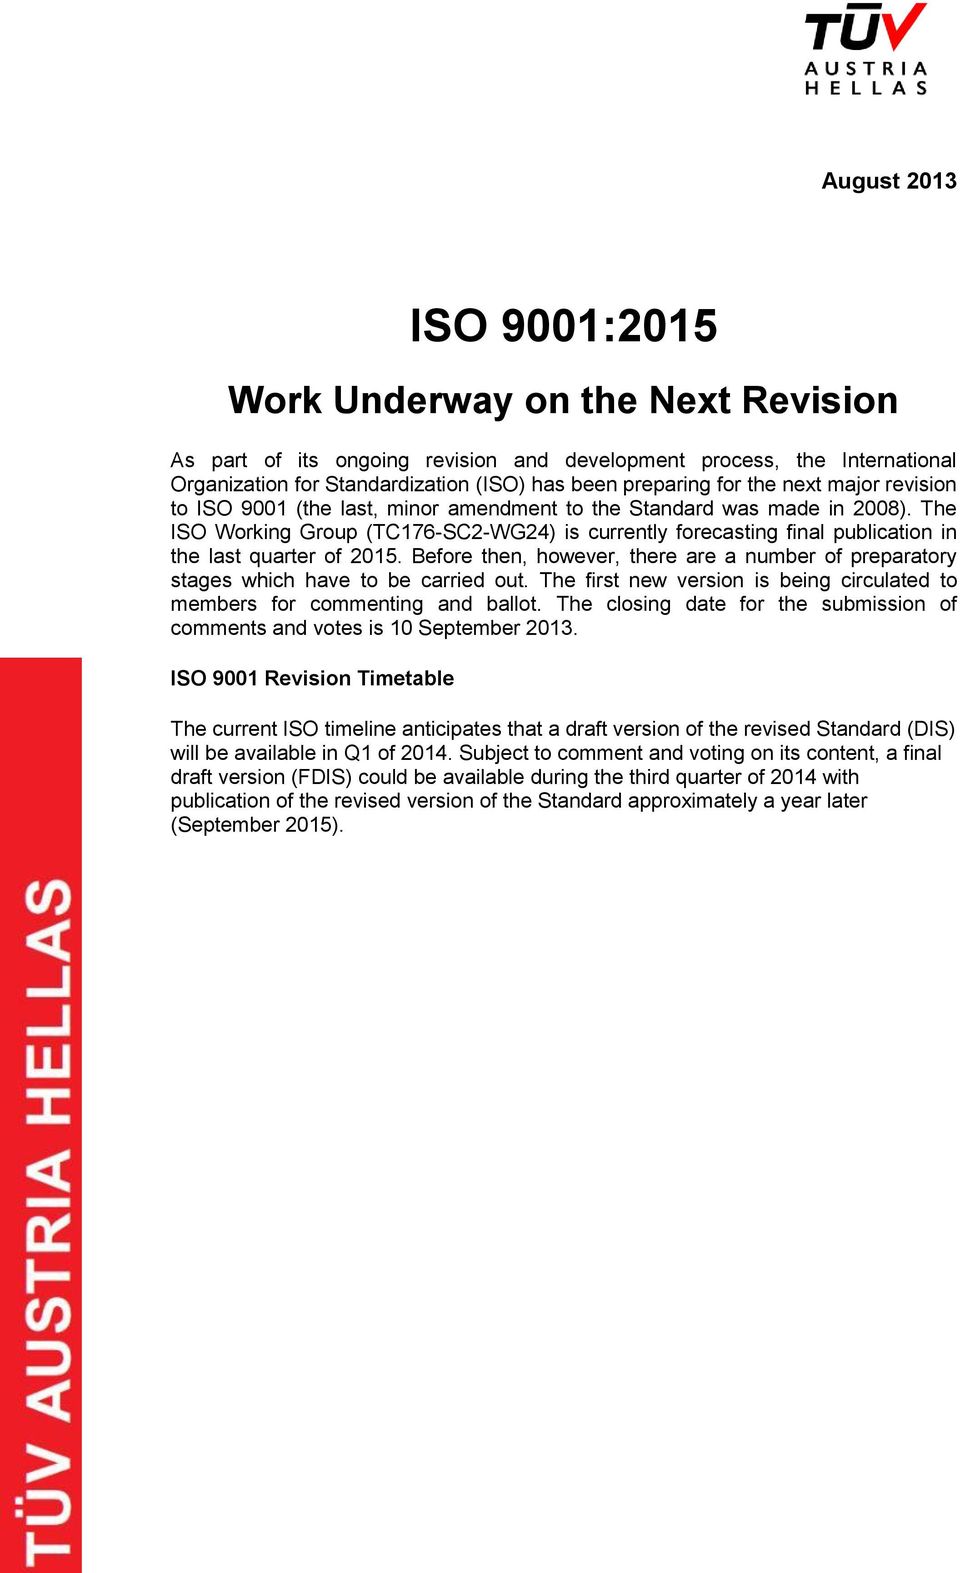 The ISO Working Group (TC176-SC2-WG24) is currently forecasting final publication in the last quarter of 2015.